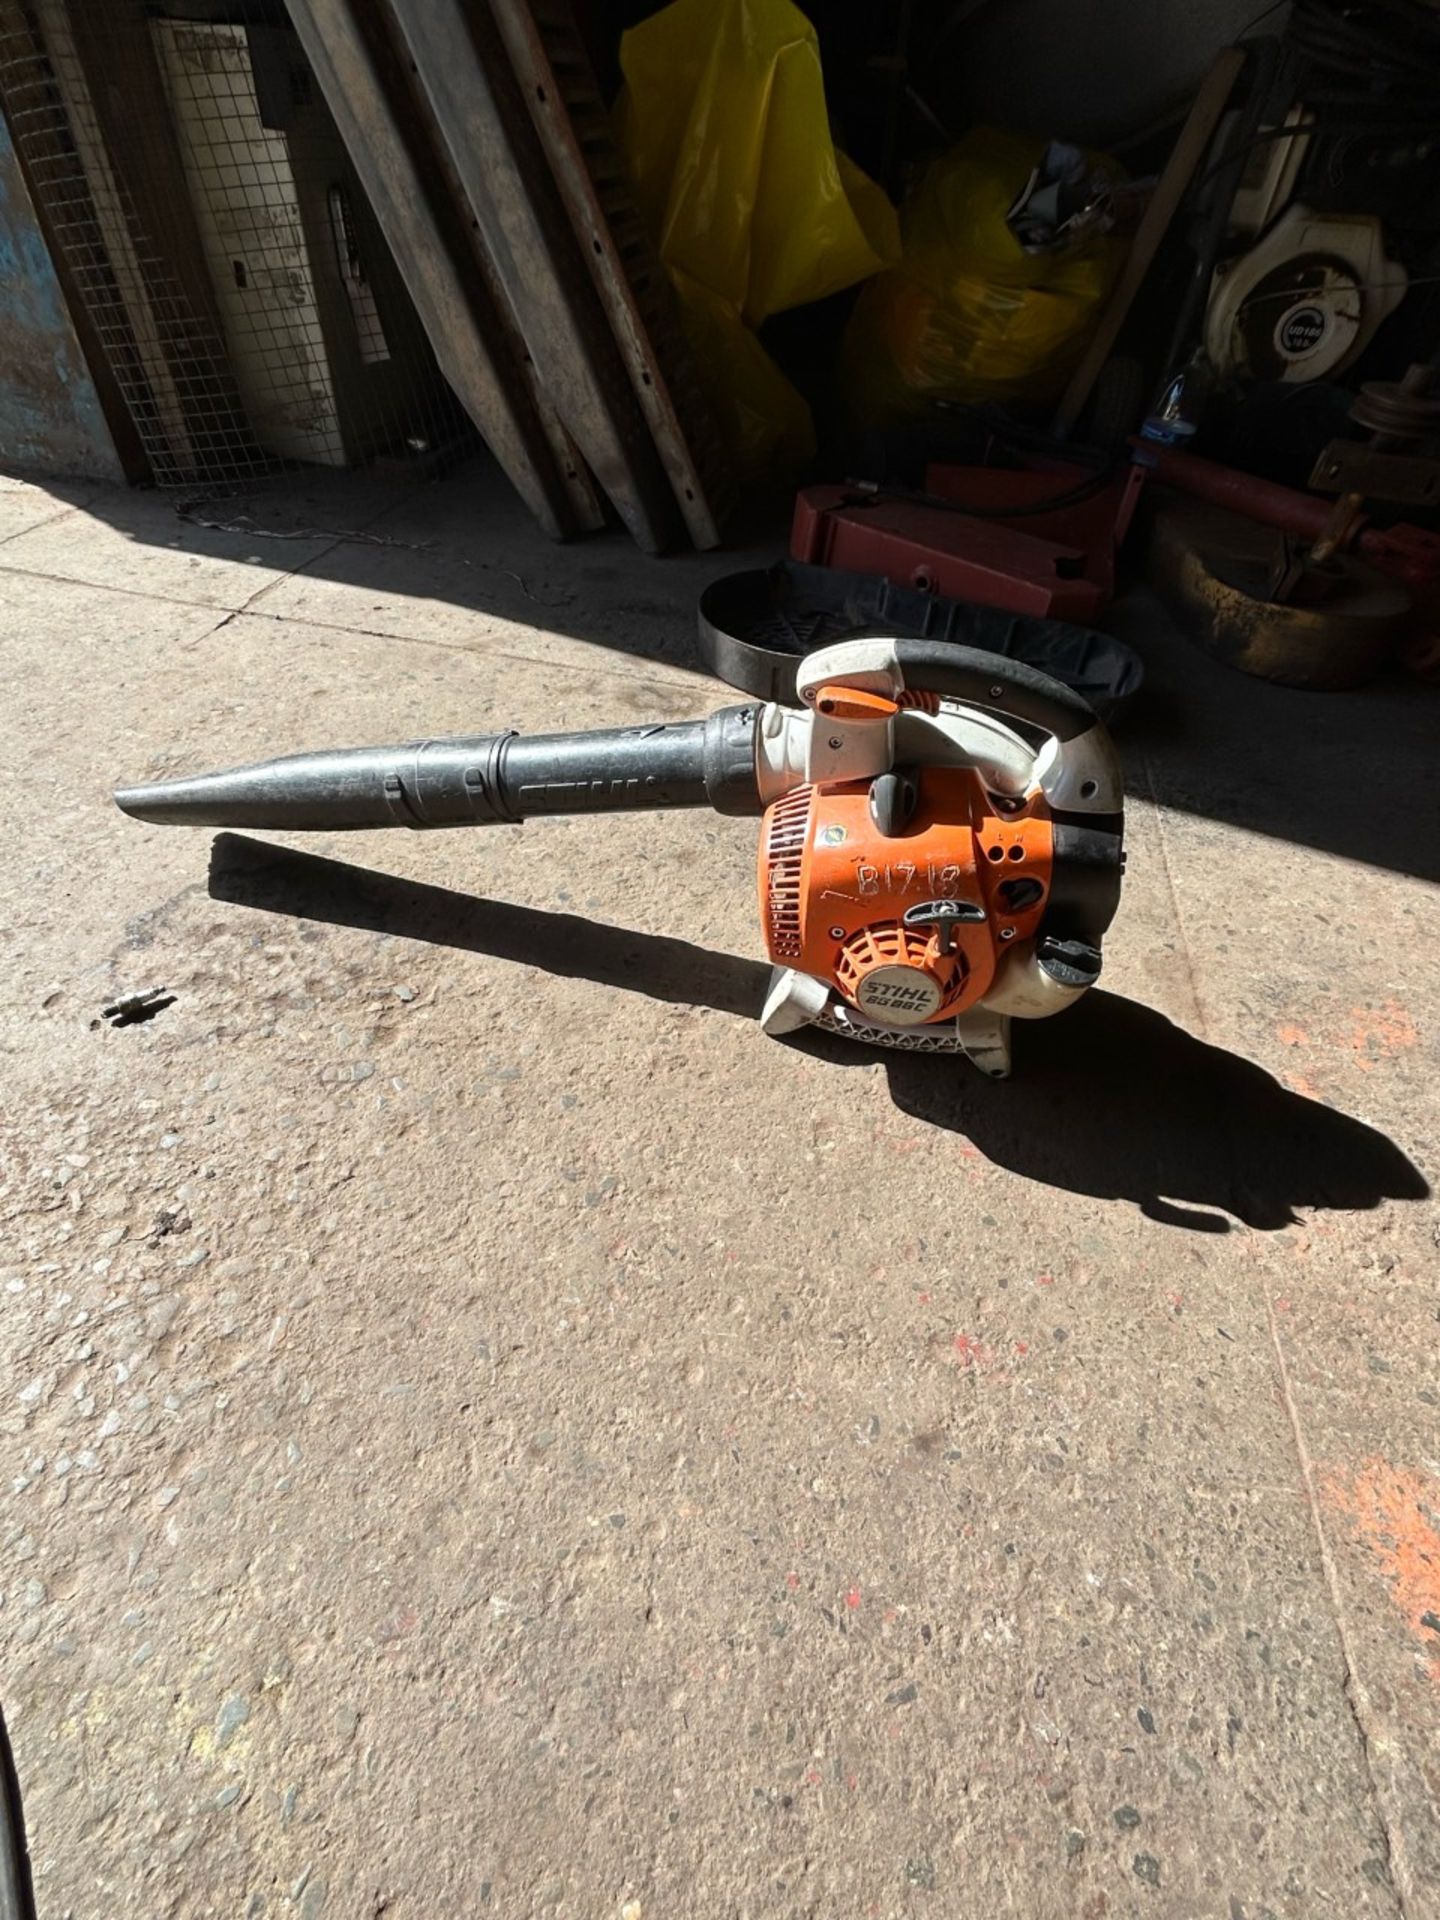 Stihl BG86C blower. Good condition, working order as seen in video